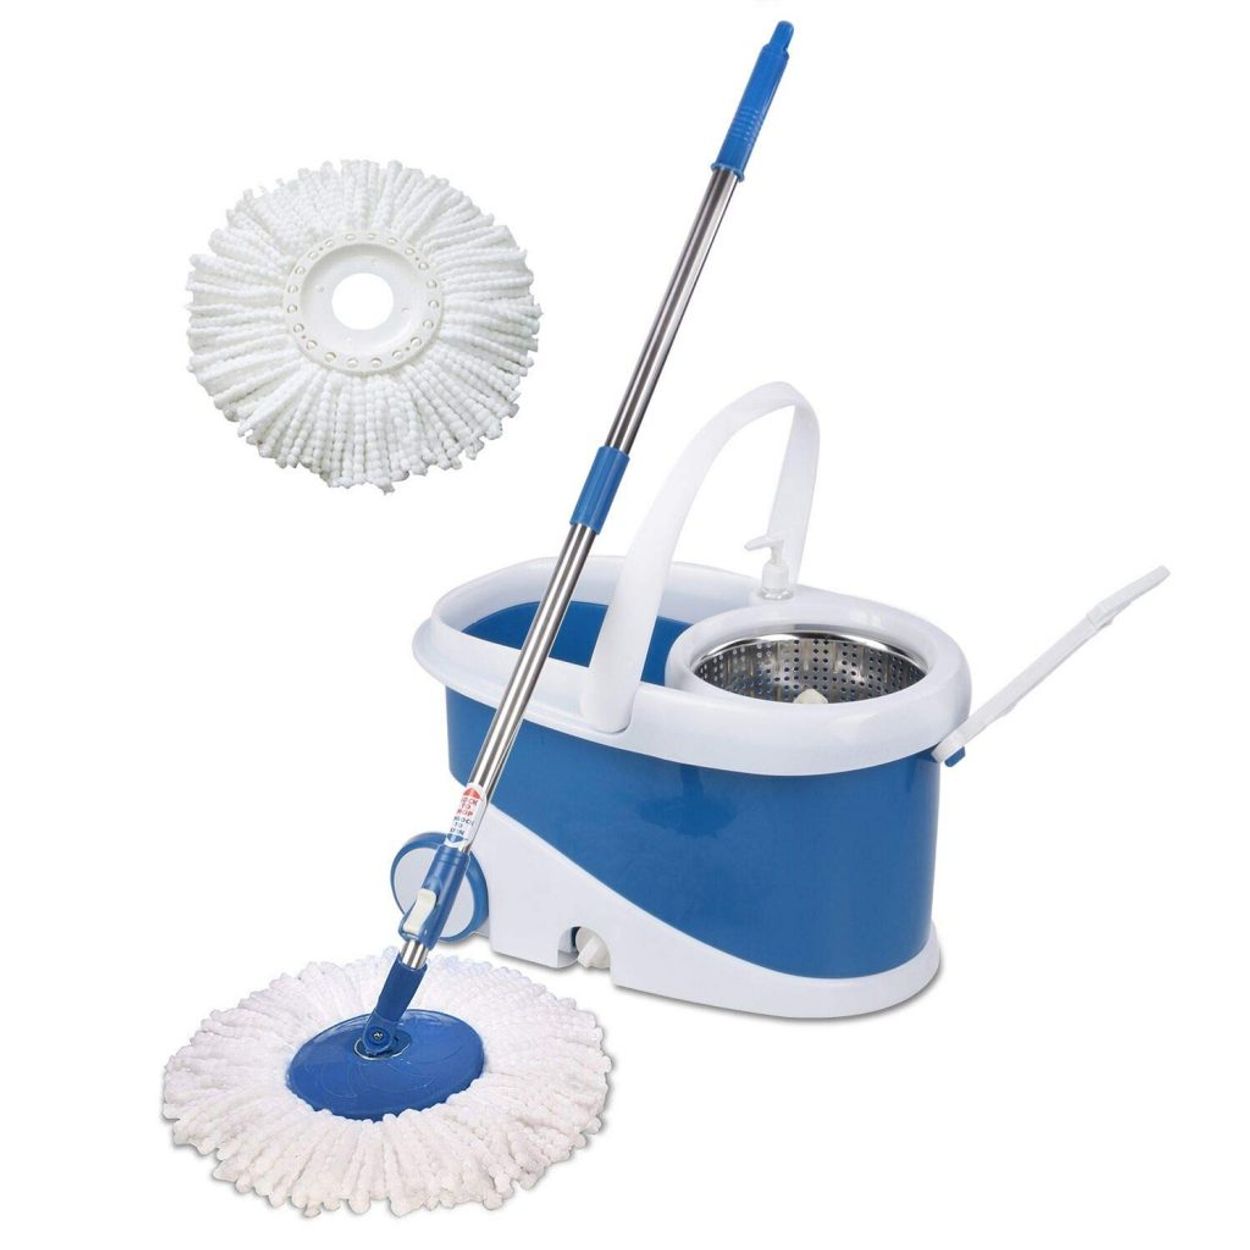 Швабра spin. Швабра Sheep Spin Mop. Spin Mop efficient Dynamics QYMOP-02. Spin Mop efficient Dynamics. Spin Mop Telescopik.